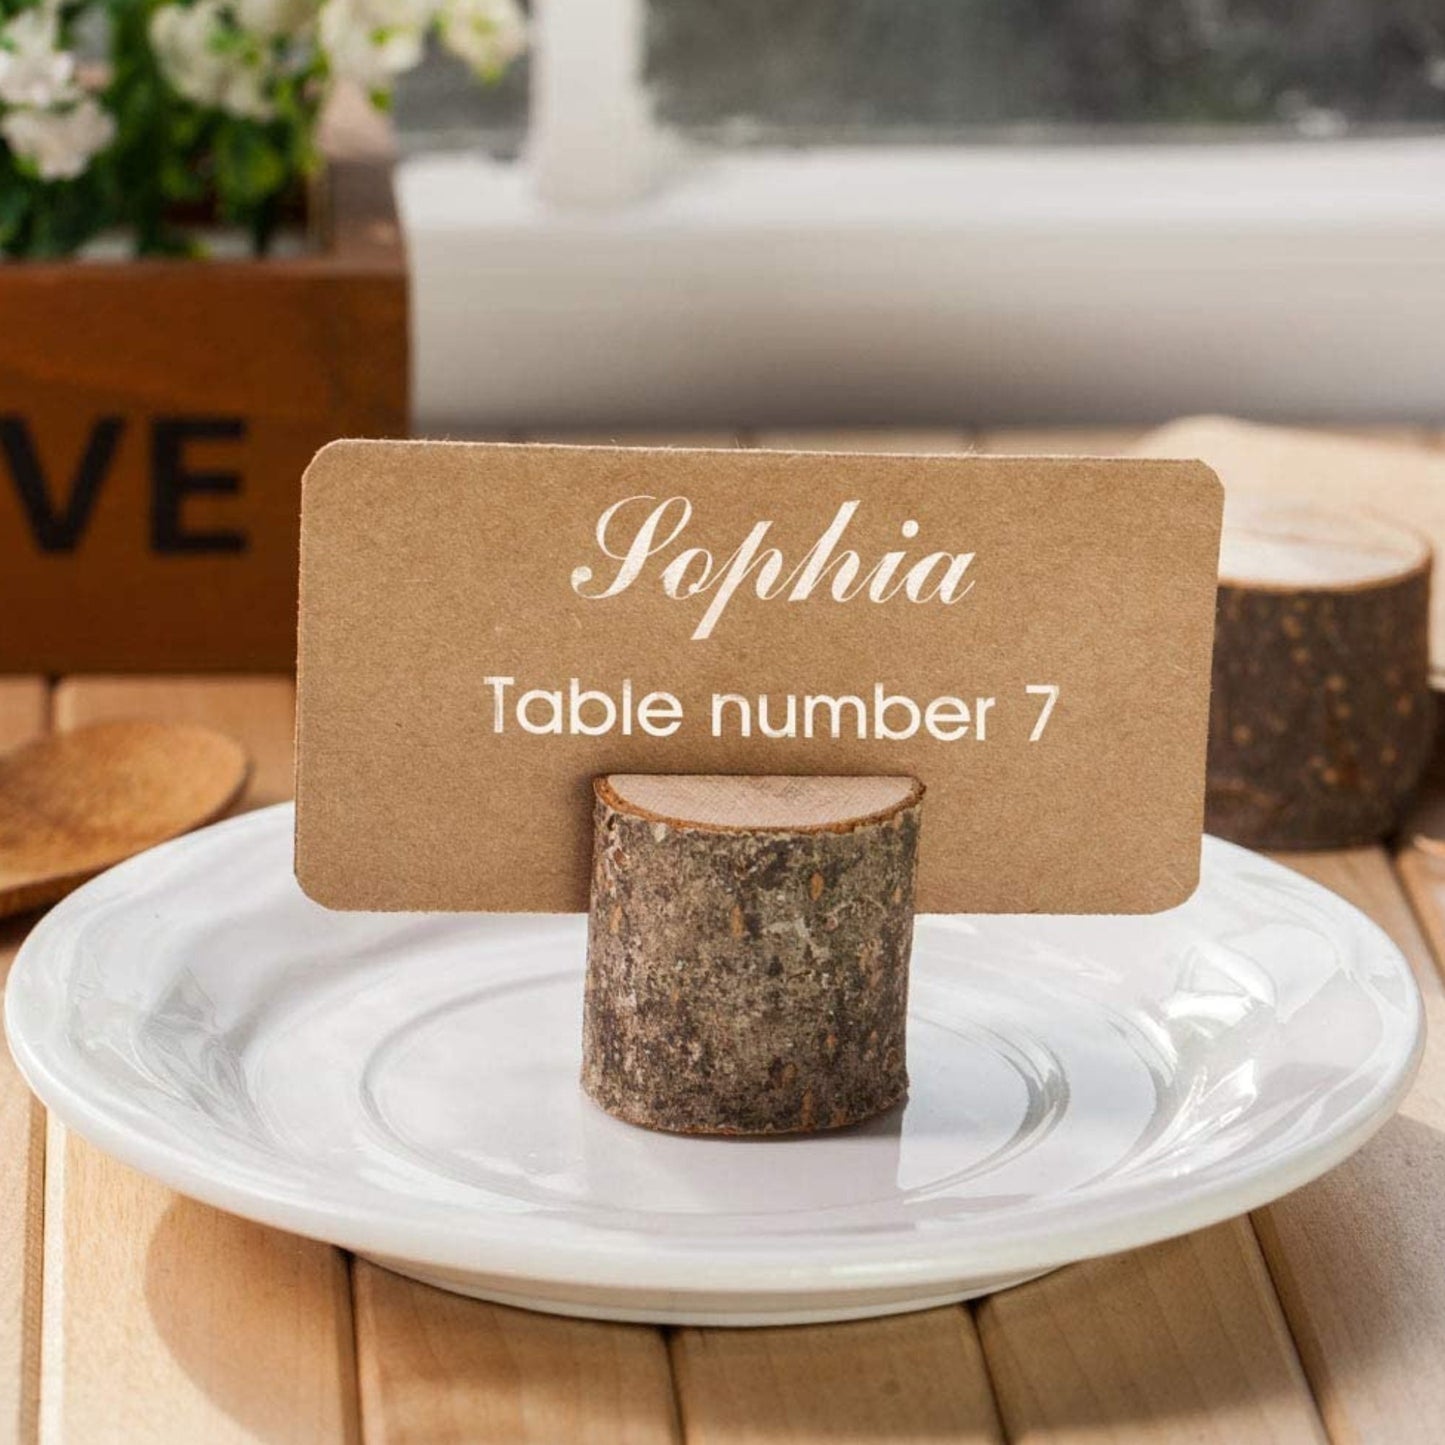 Wood Place Setting Card Holders